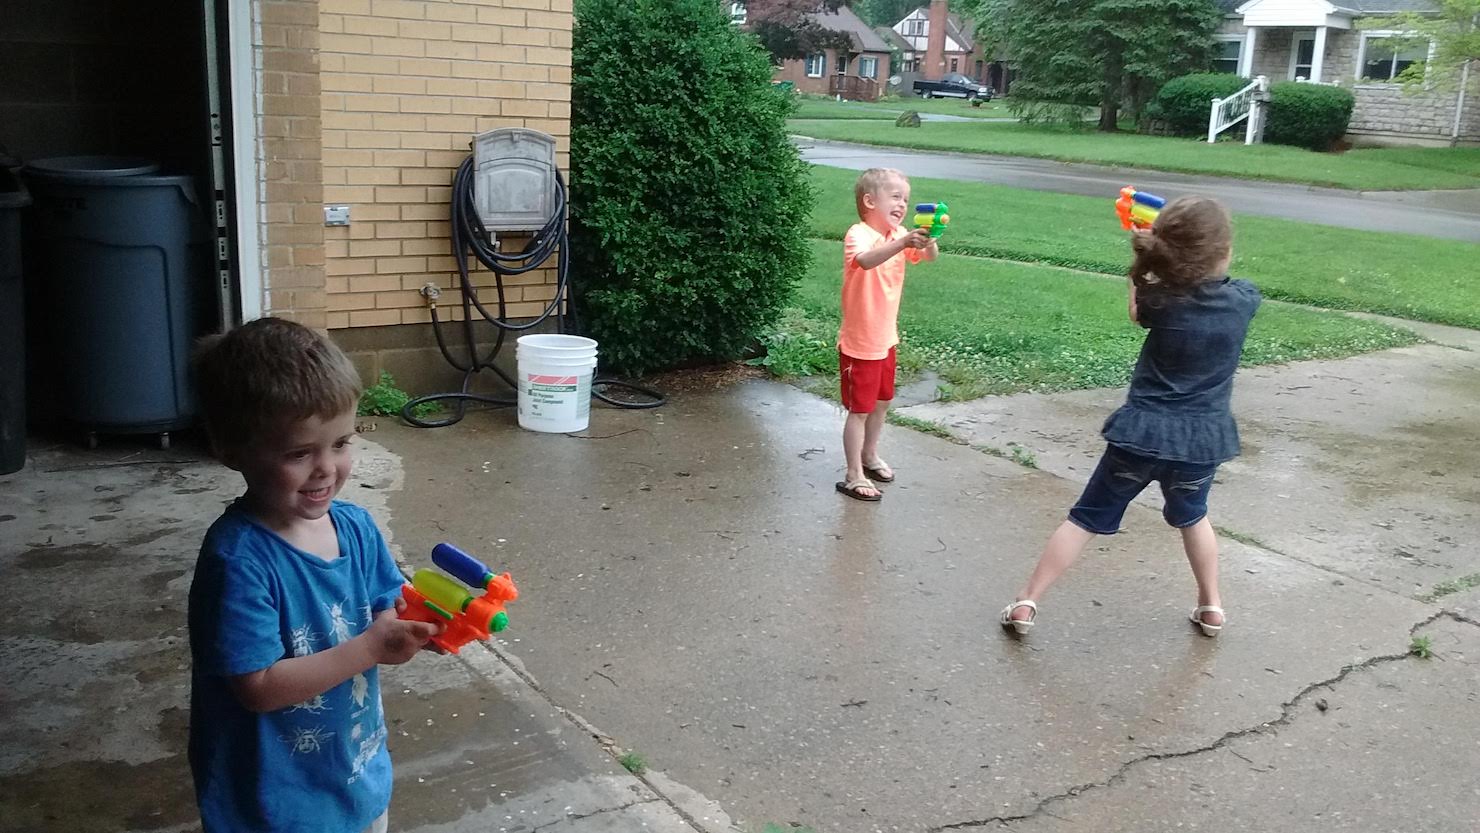 more children playing with squirt guns